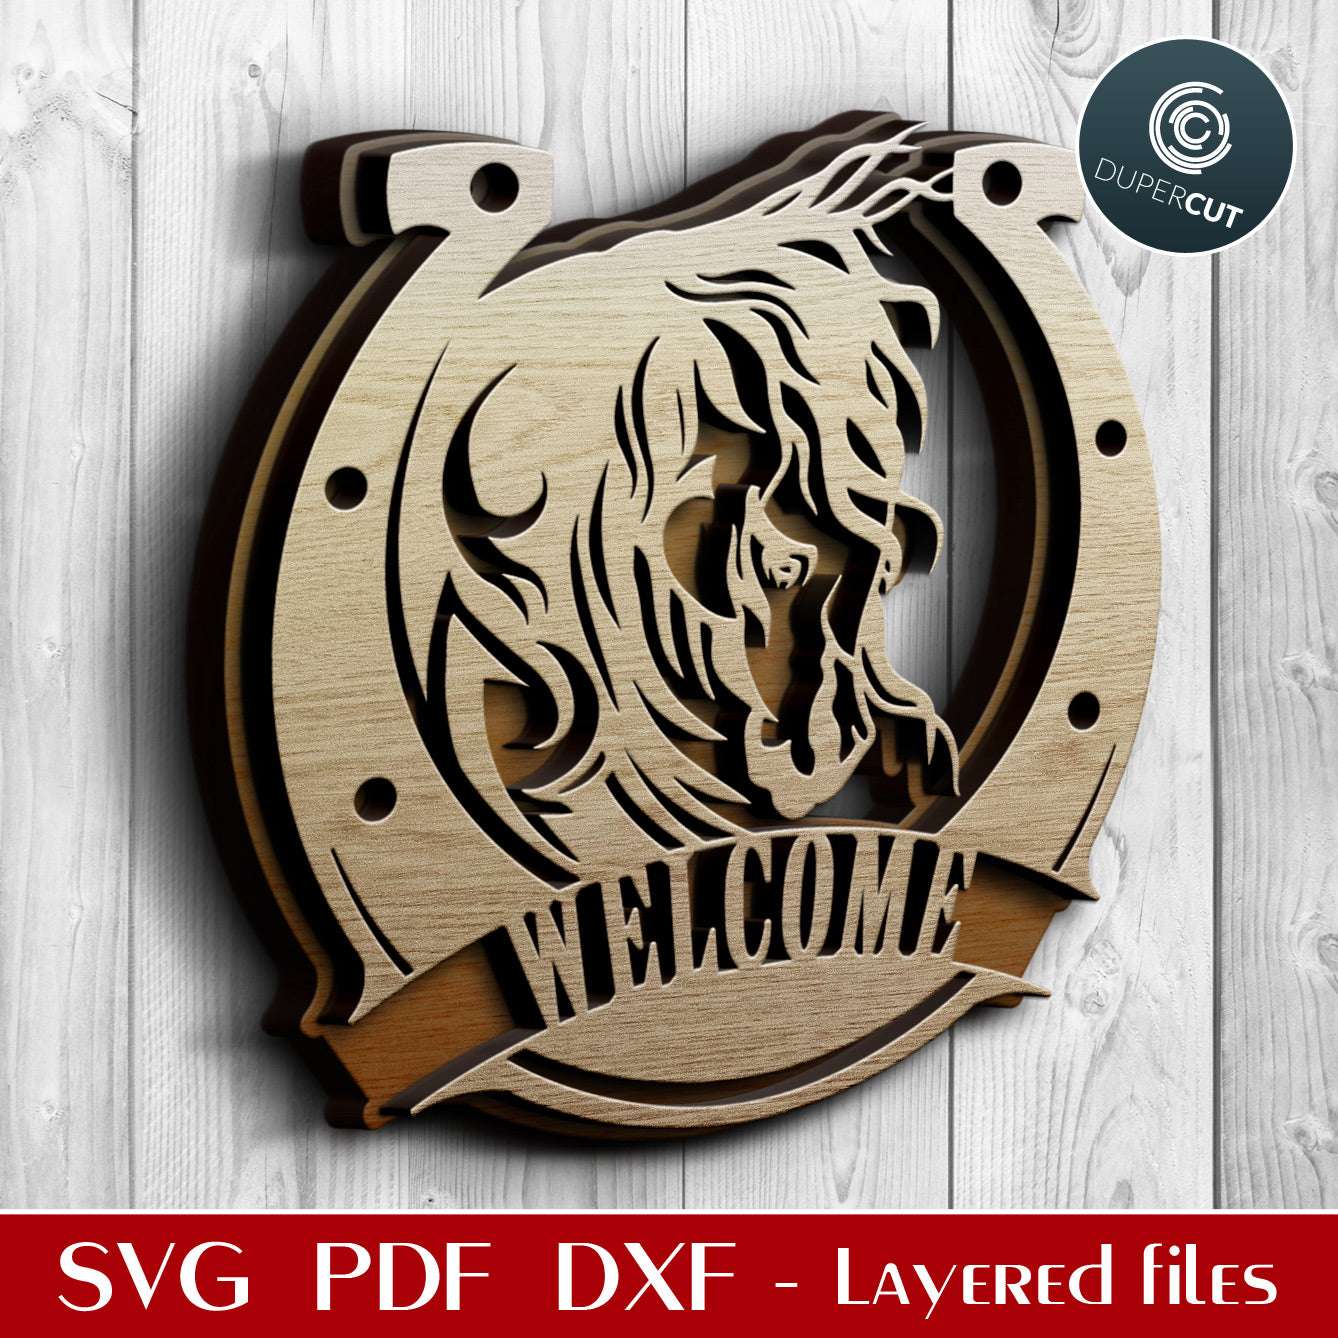 Horse head horseshoe welcome sign - SVG PDF DXF layered laser cutting files for Glowforge, Cricut, Silhouette Cameo, CNC plasma machines by DuperCut